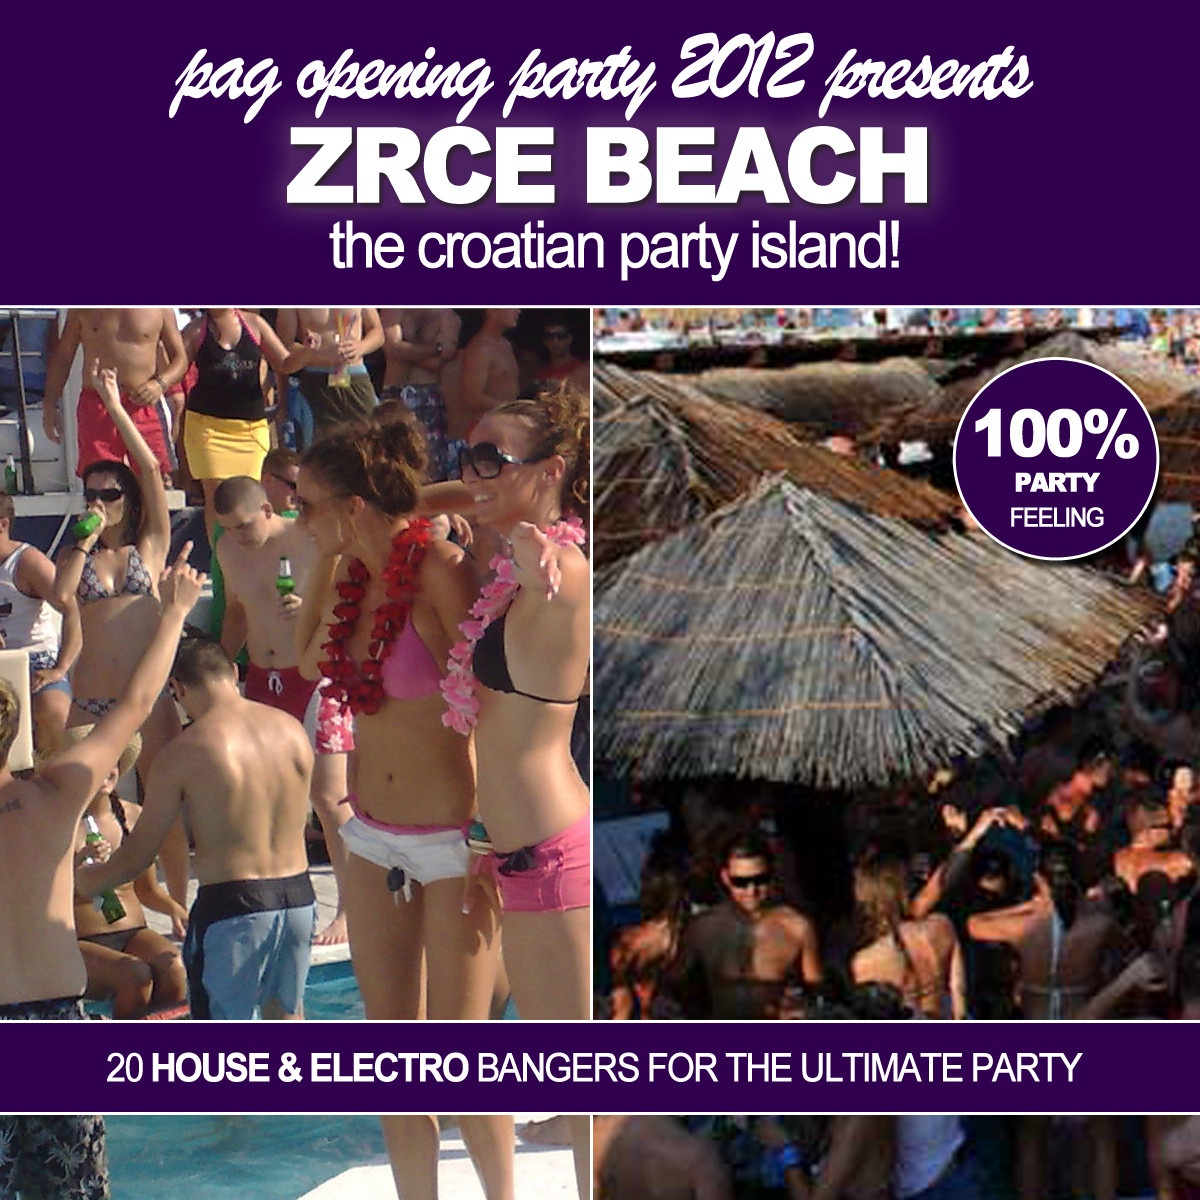 Pag Opening Party 2012 pres. Zrce Beach! - The Croatian Party Island!